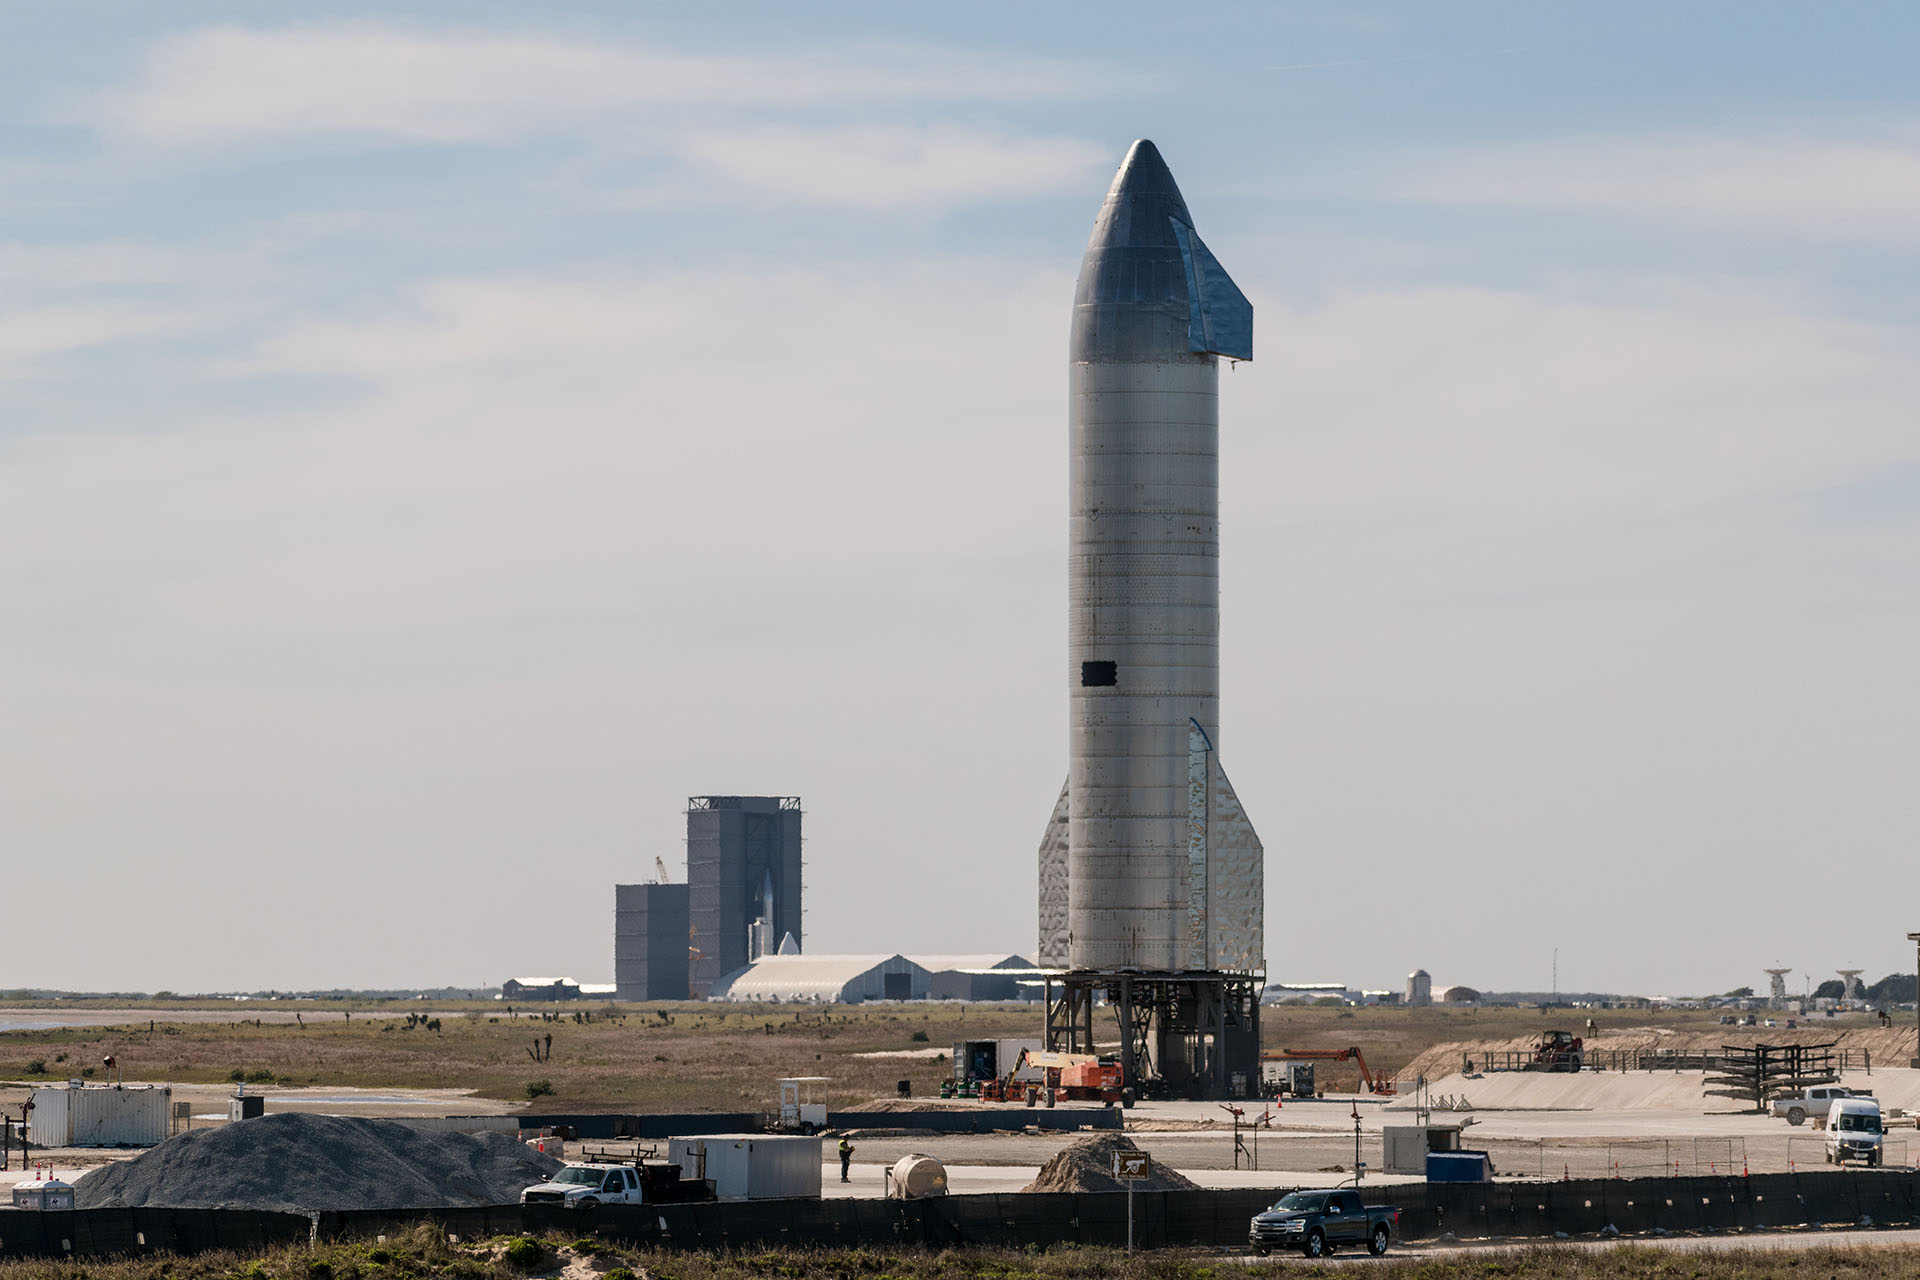 An Update on Starship: Booster 9 Adorned with a Crown, Construction Progress, and HLS Test Article Development